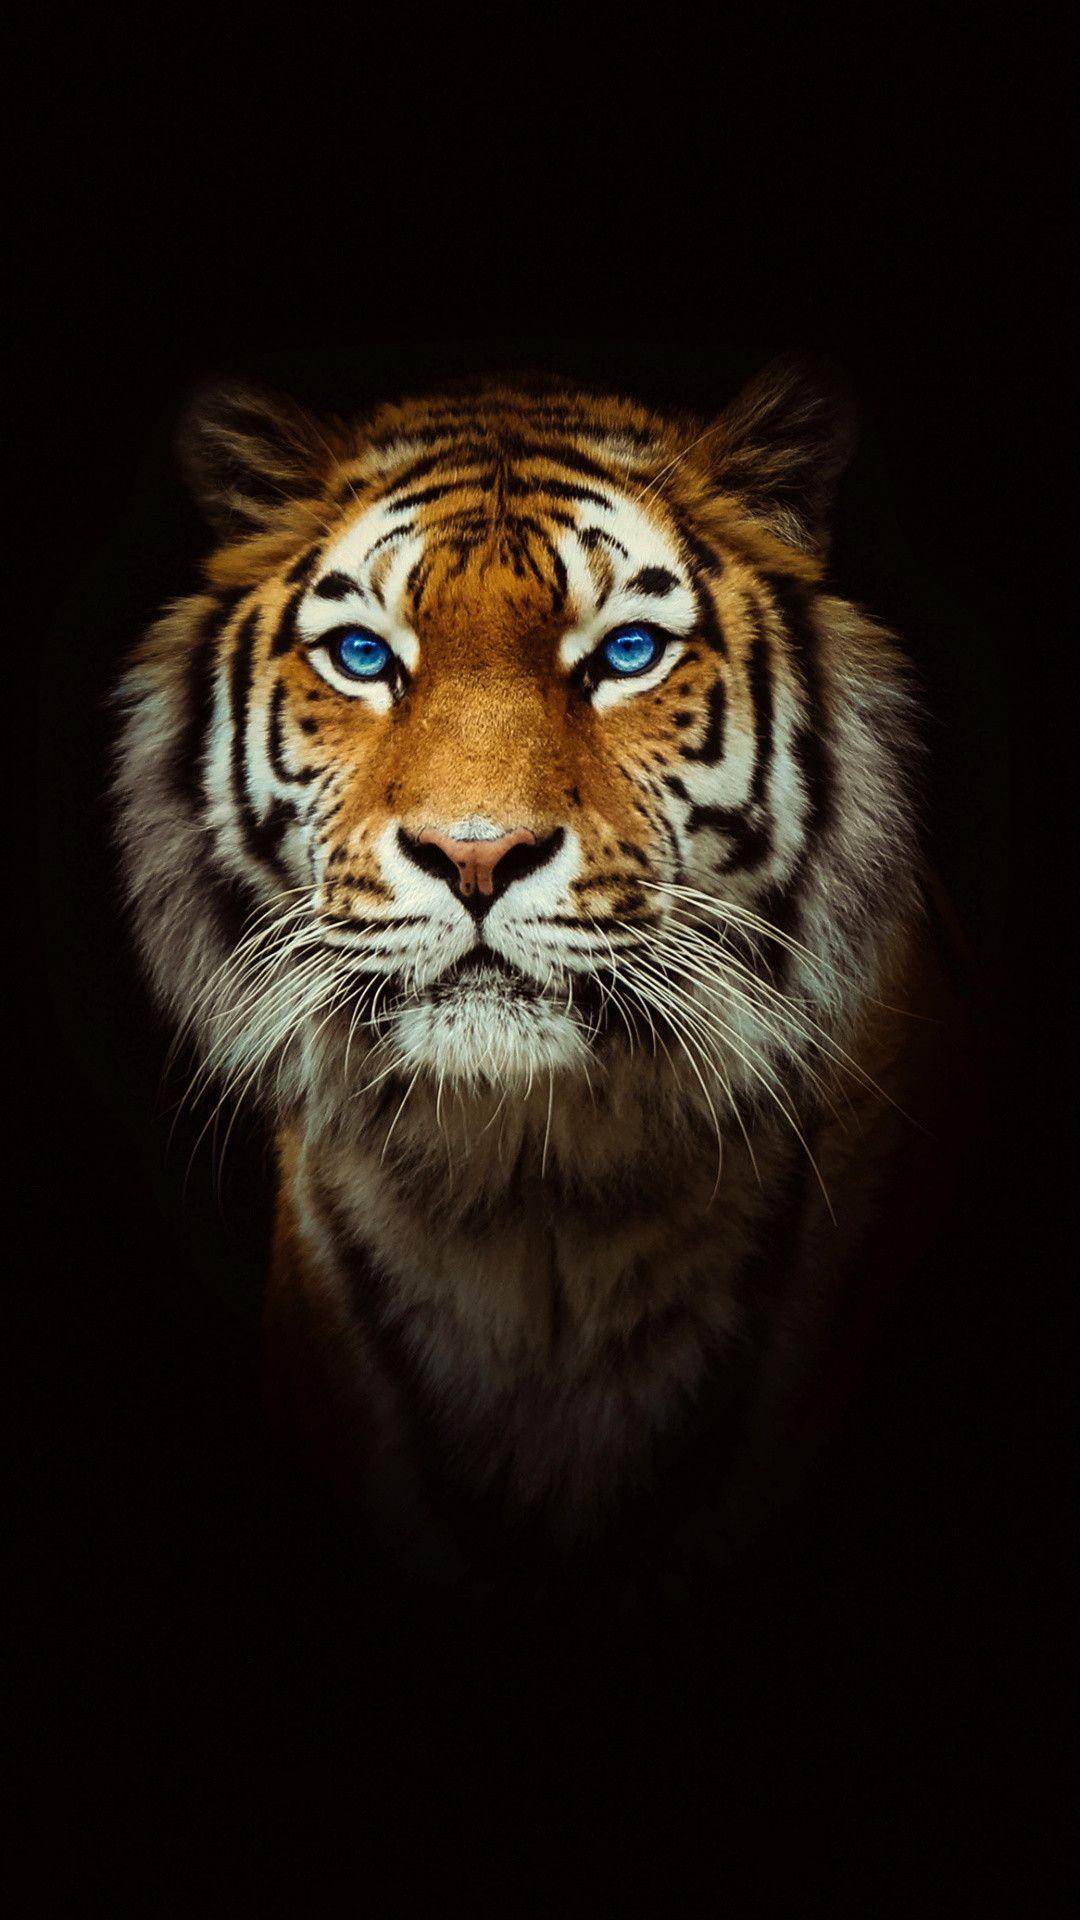 Looking for HD wallpapers for your iPhone? Tiger iPhone HD Wallpapers is what you need! A majestic and powerful creature like a tiger is the perfect choice for a wallpaper that will give you strength and courage every time you look at your phone.